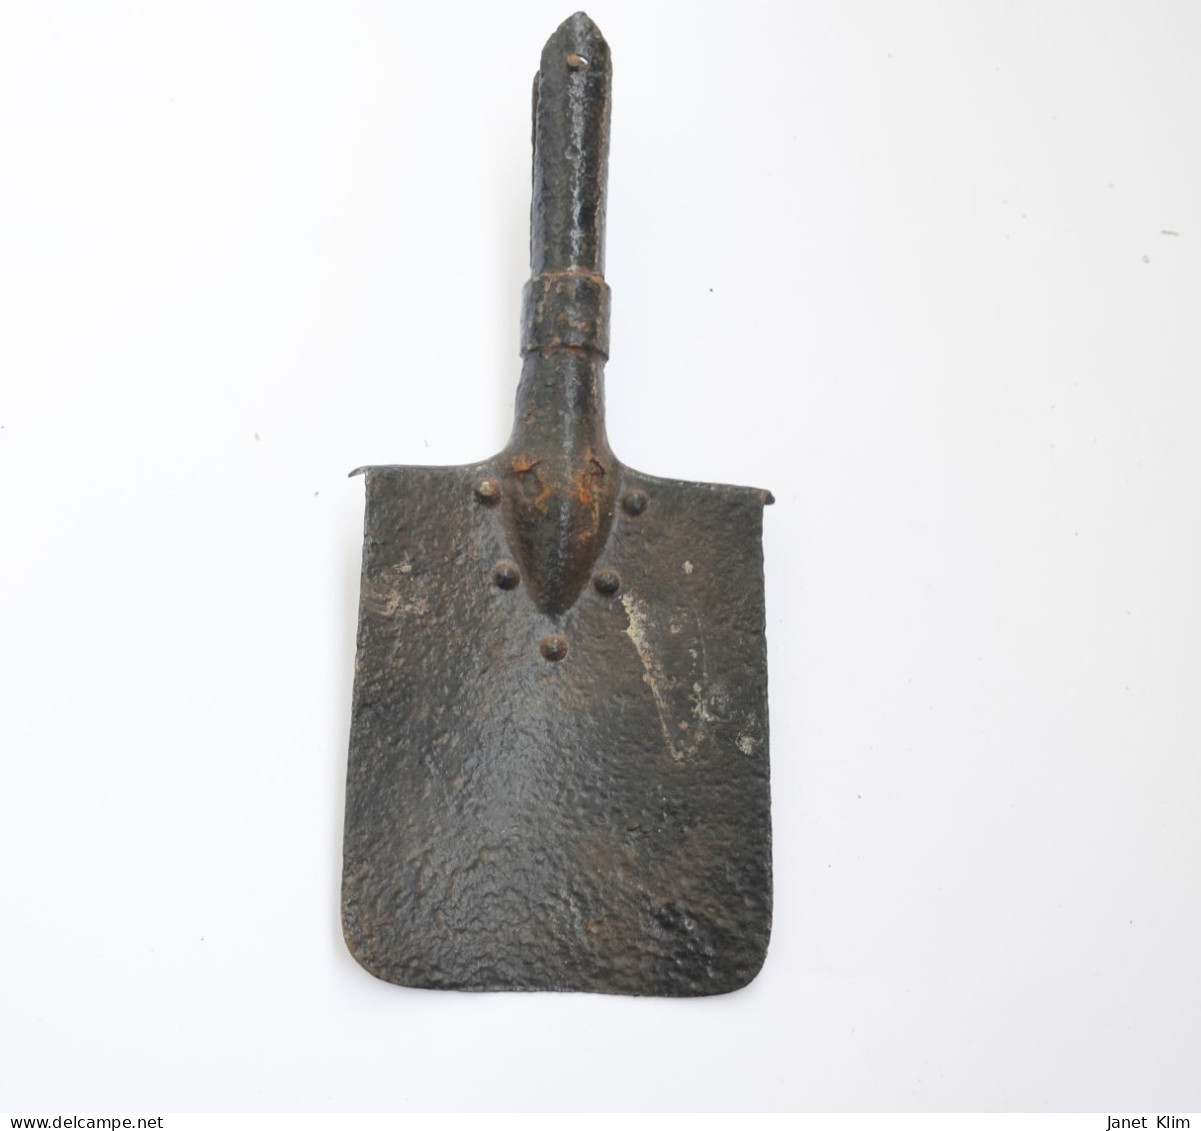 Sapper Shovel Shovel From The Period Of The Second World War Germany Or USSR - 1939-45